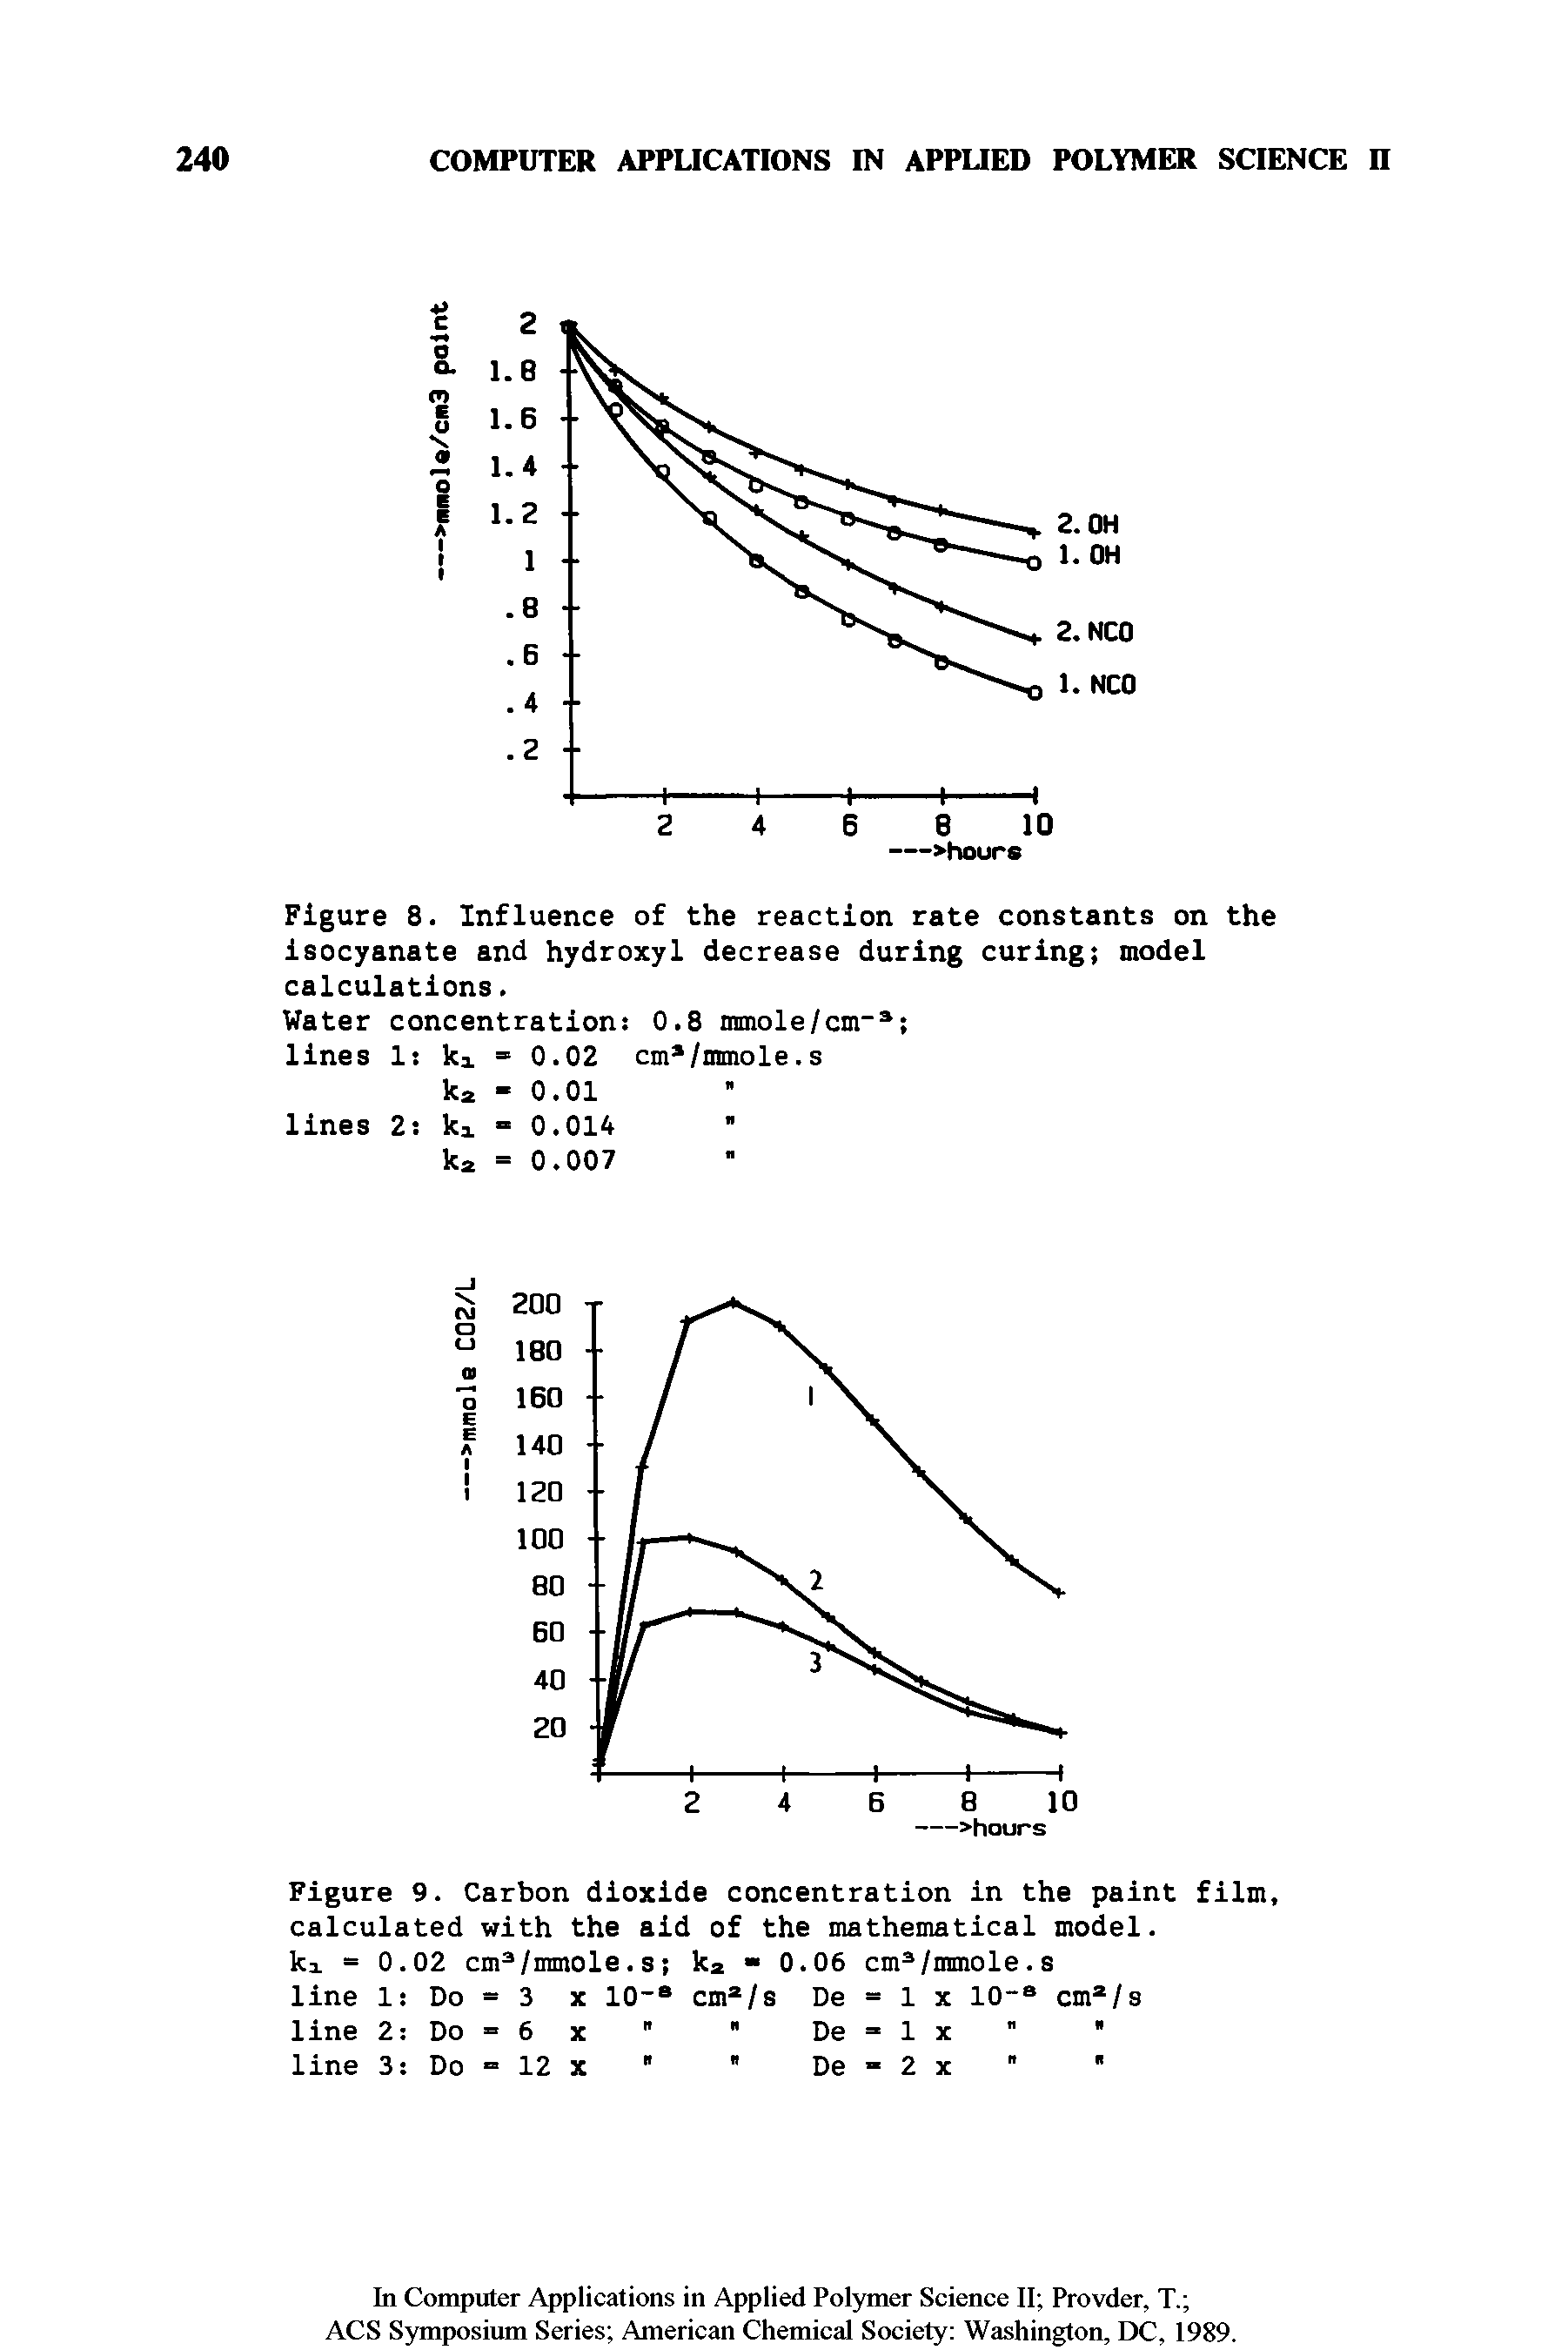 Figure 9. Carbon dioxide concentration in the paint film, calculated with the aid of the mathematical model, ki = 0.02 cm /mmole.s ka 0.06 cm /mmole.s...